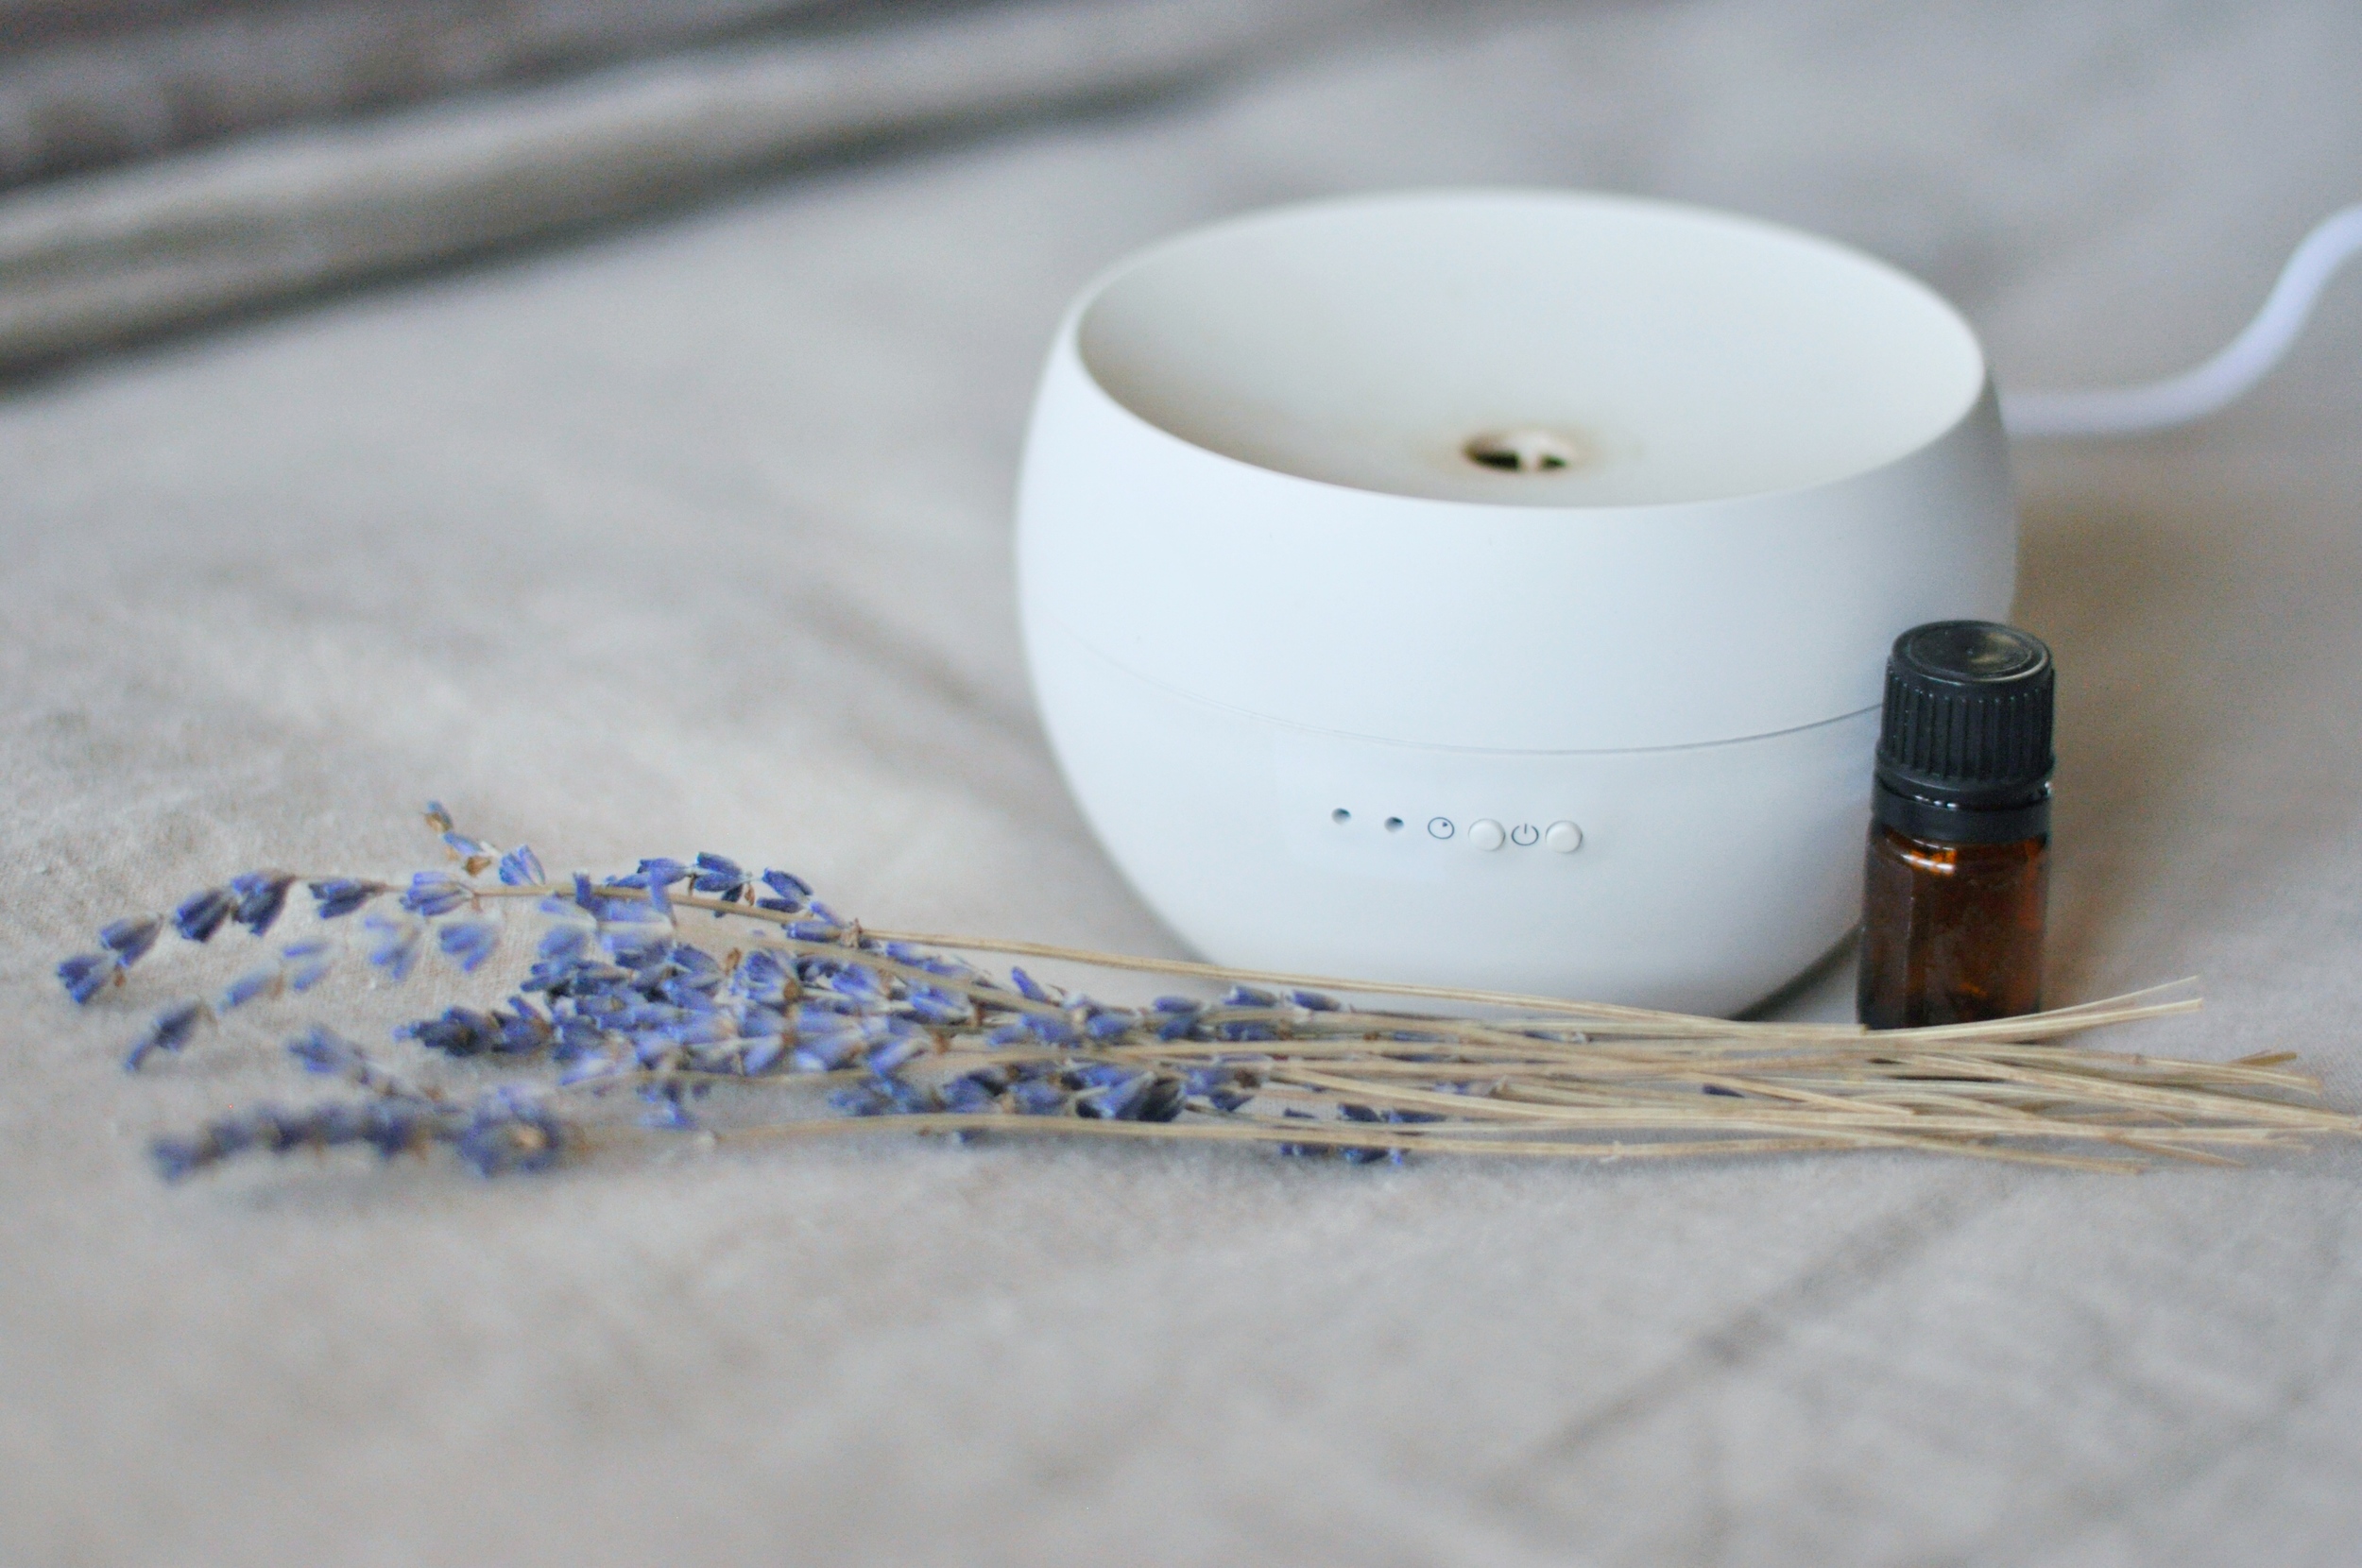 7. Try Calming Essential Oils